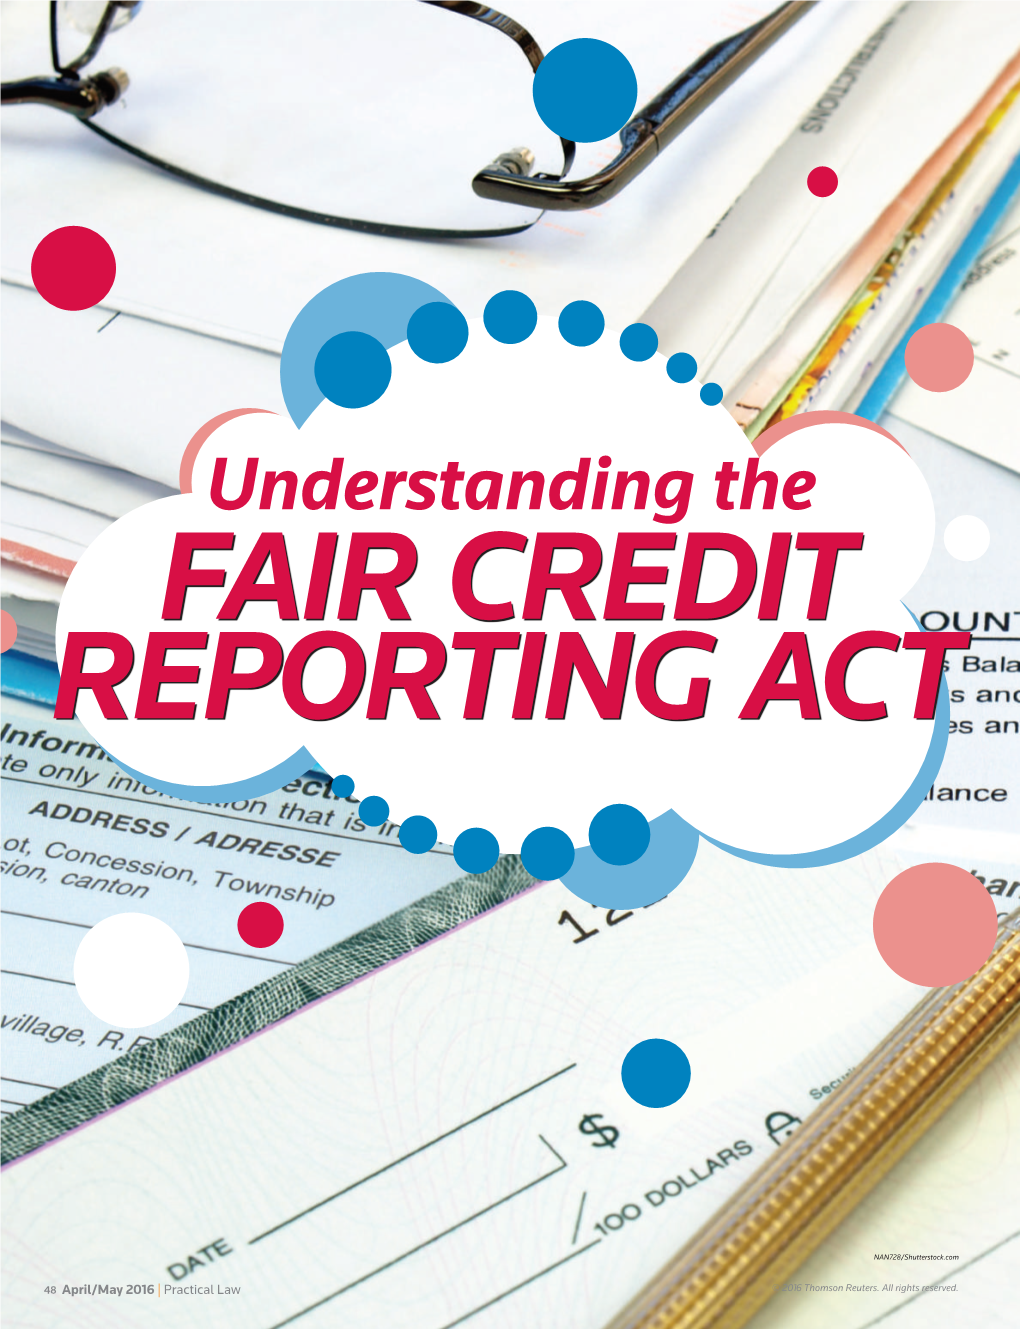 Understanding the FAIR CREDIT REPORTING ACT